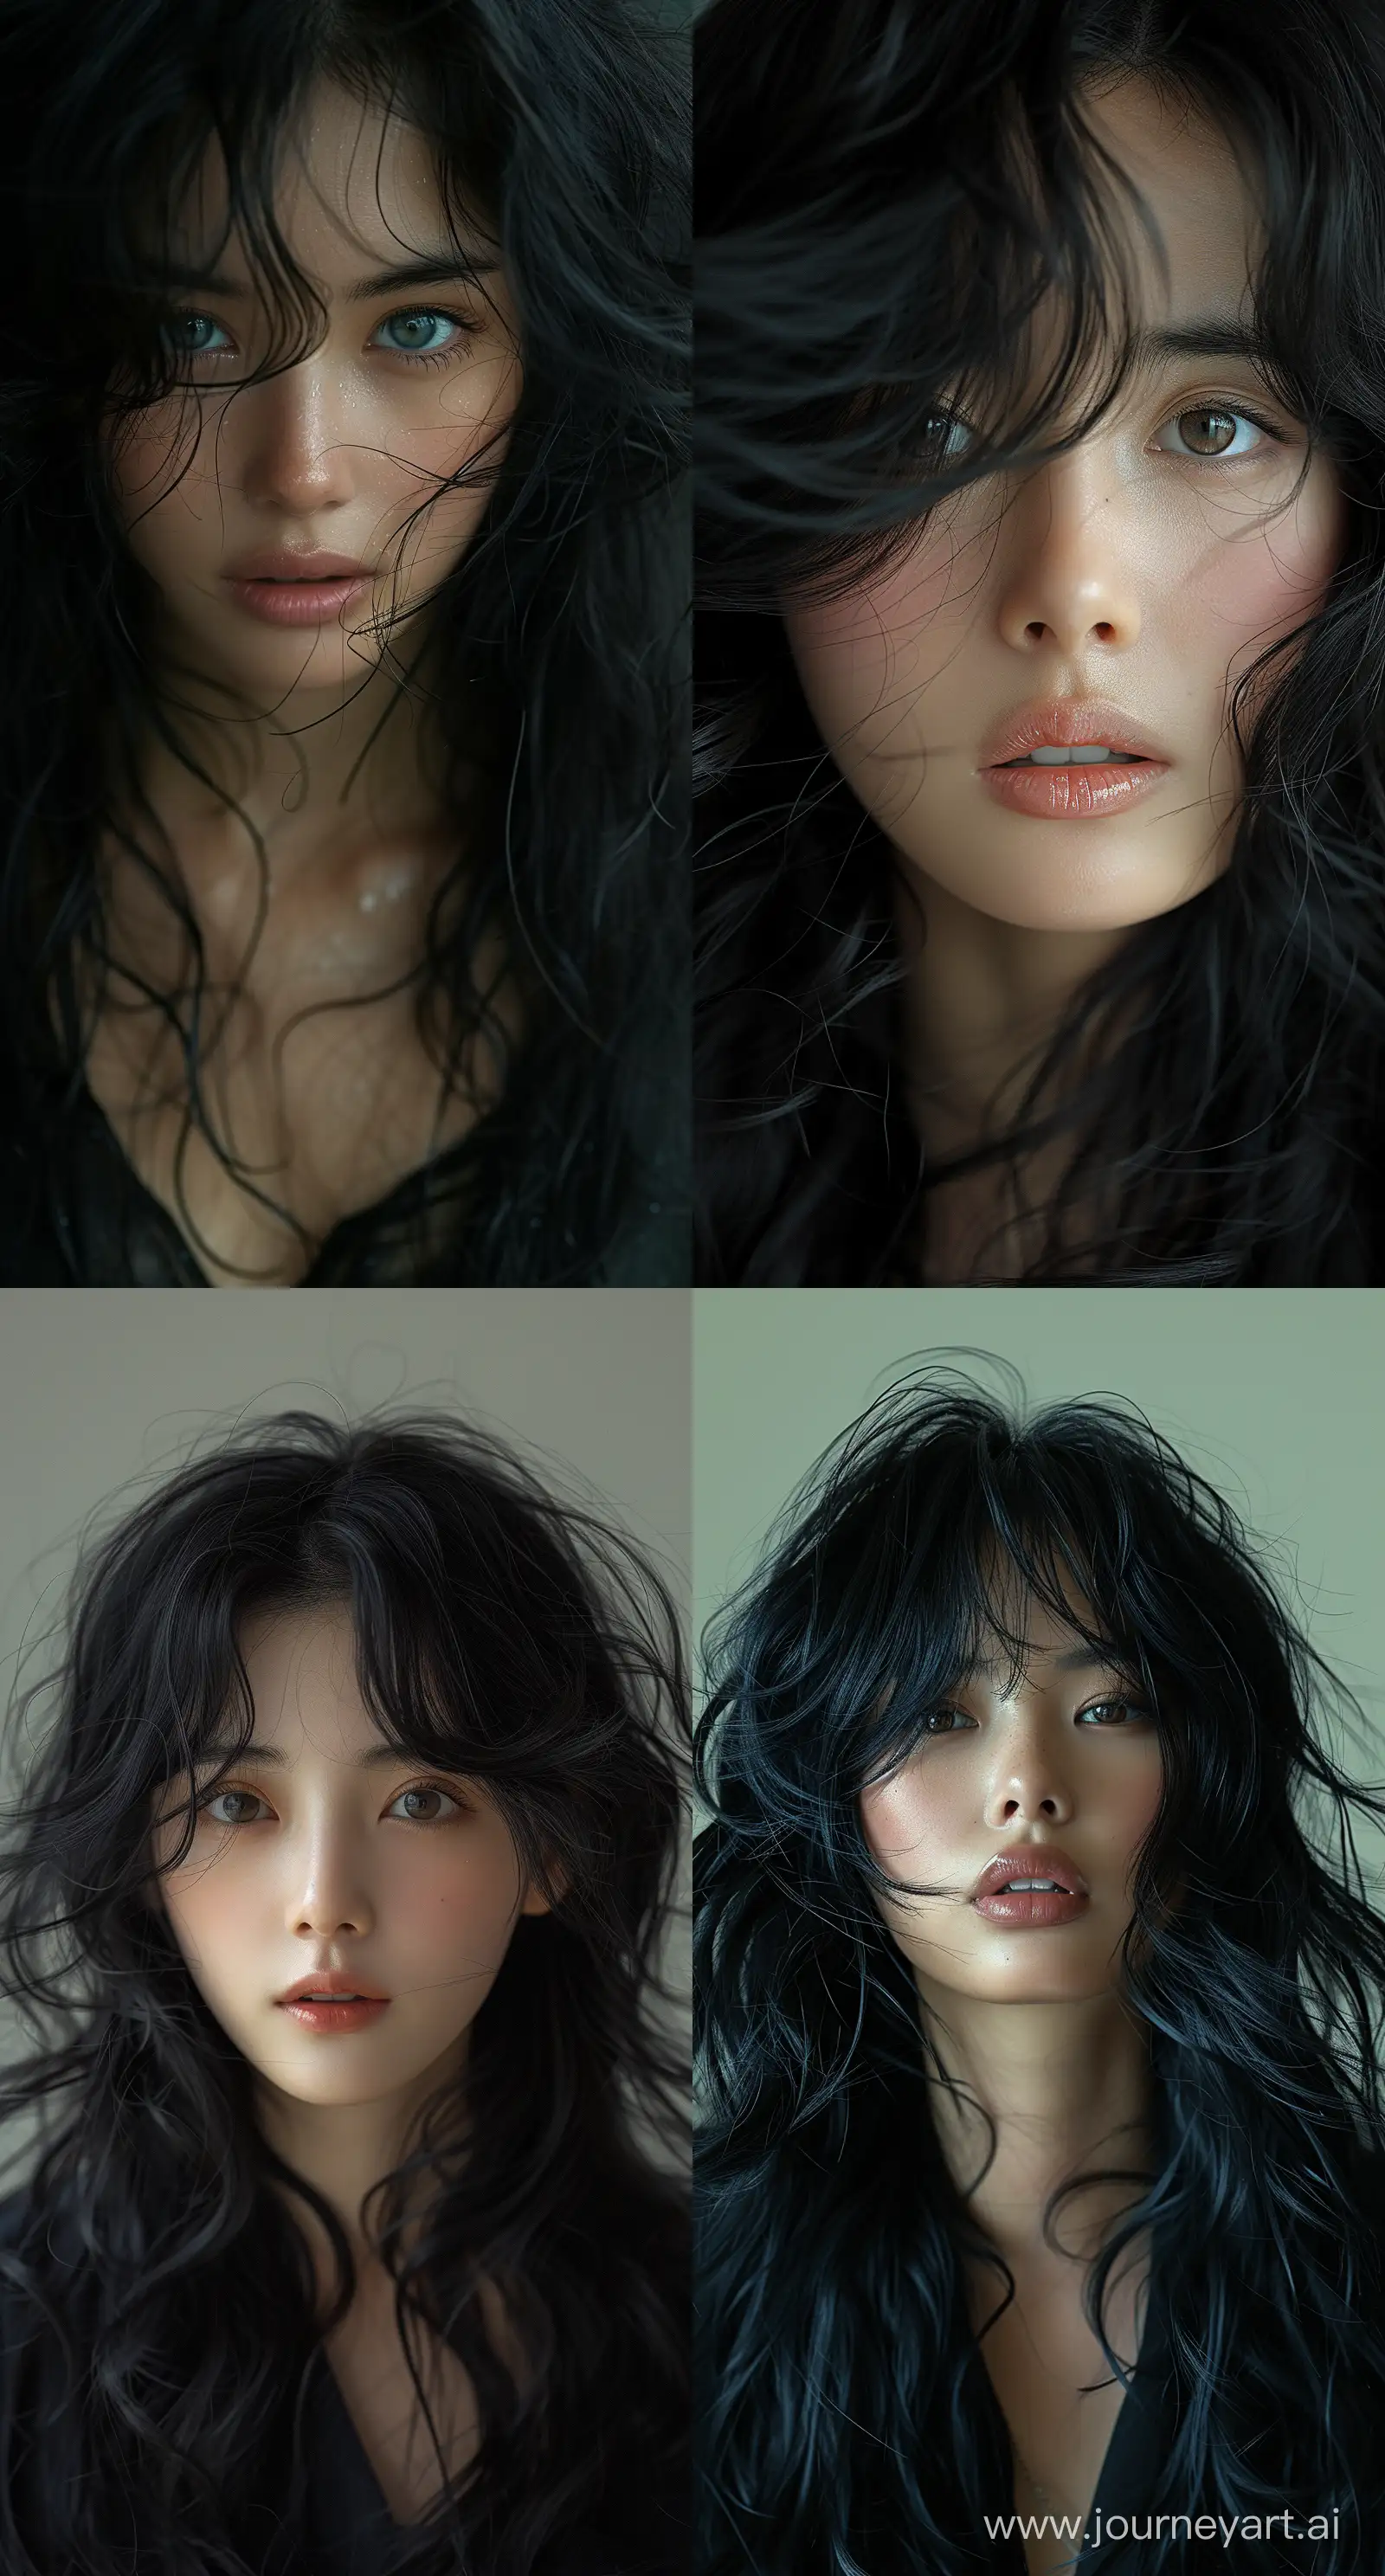 Expressive-Portrait-of-a-Woman-with-Flowing-Black-Hair-in-Dain-Yoon-Style